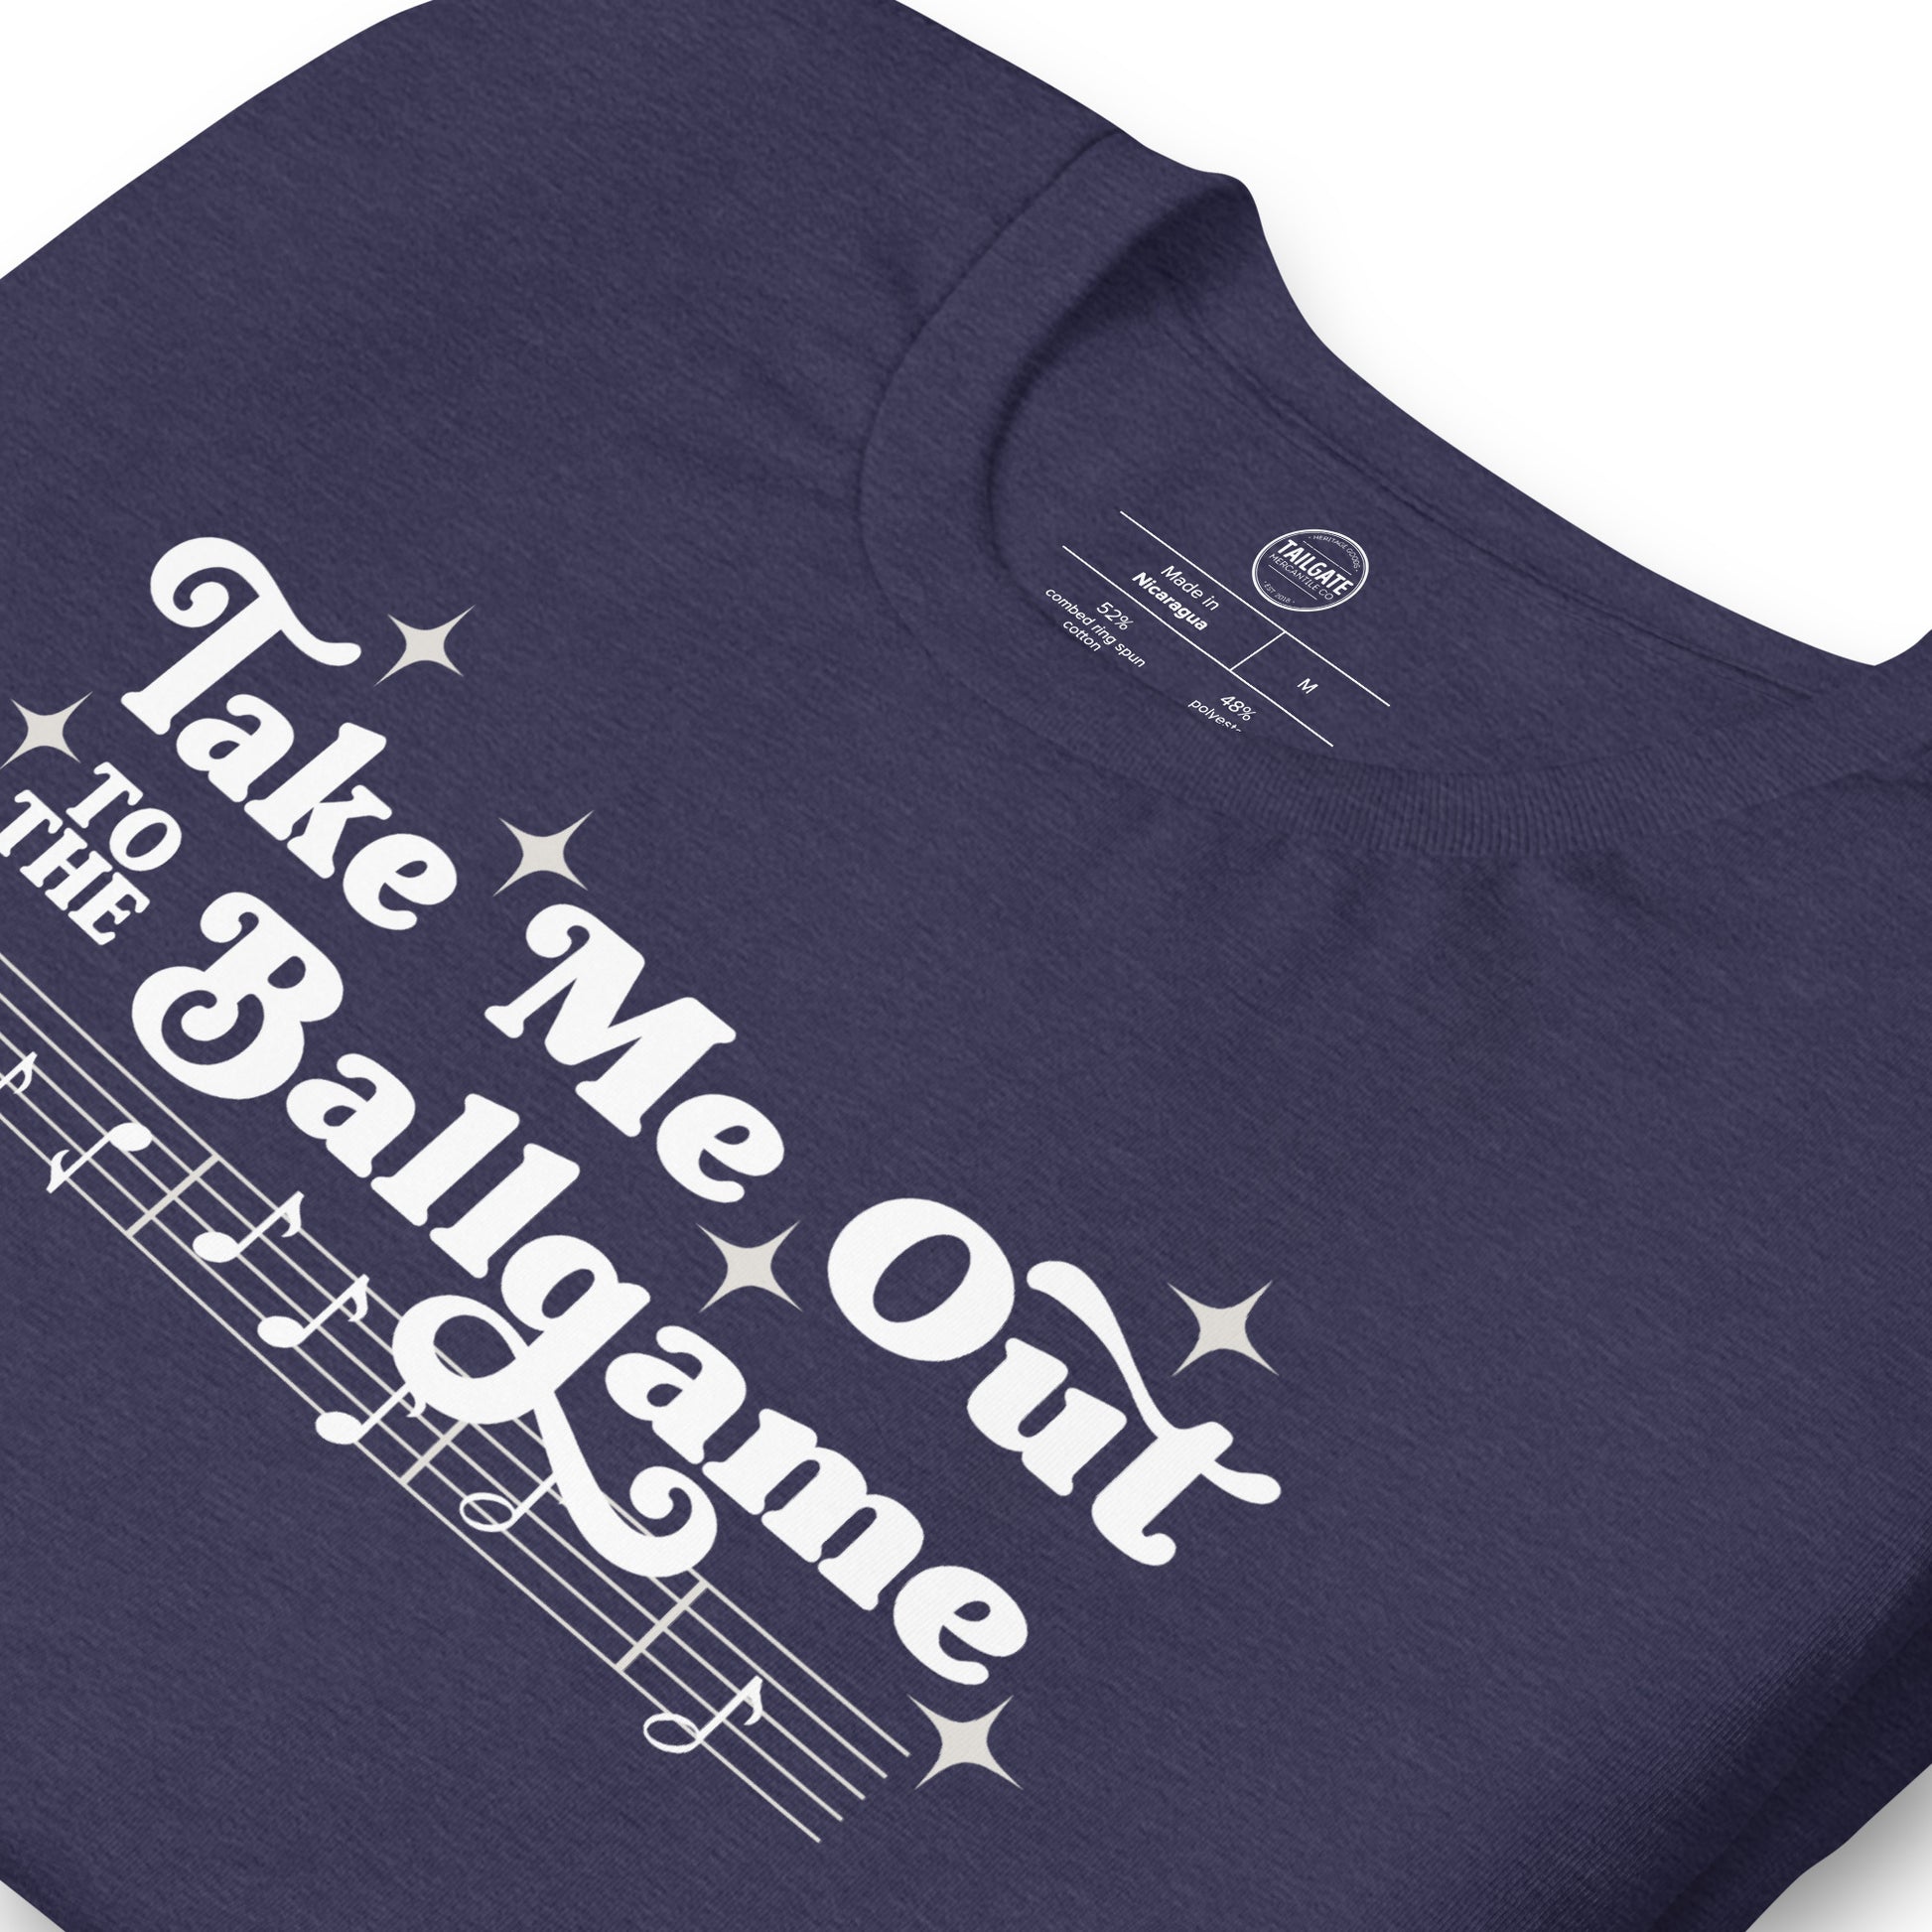 Close up image of heather navy t-shirt with design of "Take Me Out to the Ballgame" with coordinating musical notes in white located on centre chest. This design is exclusive to Tailgate Mercantile and available only online.